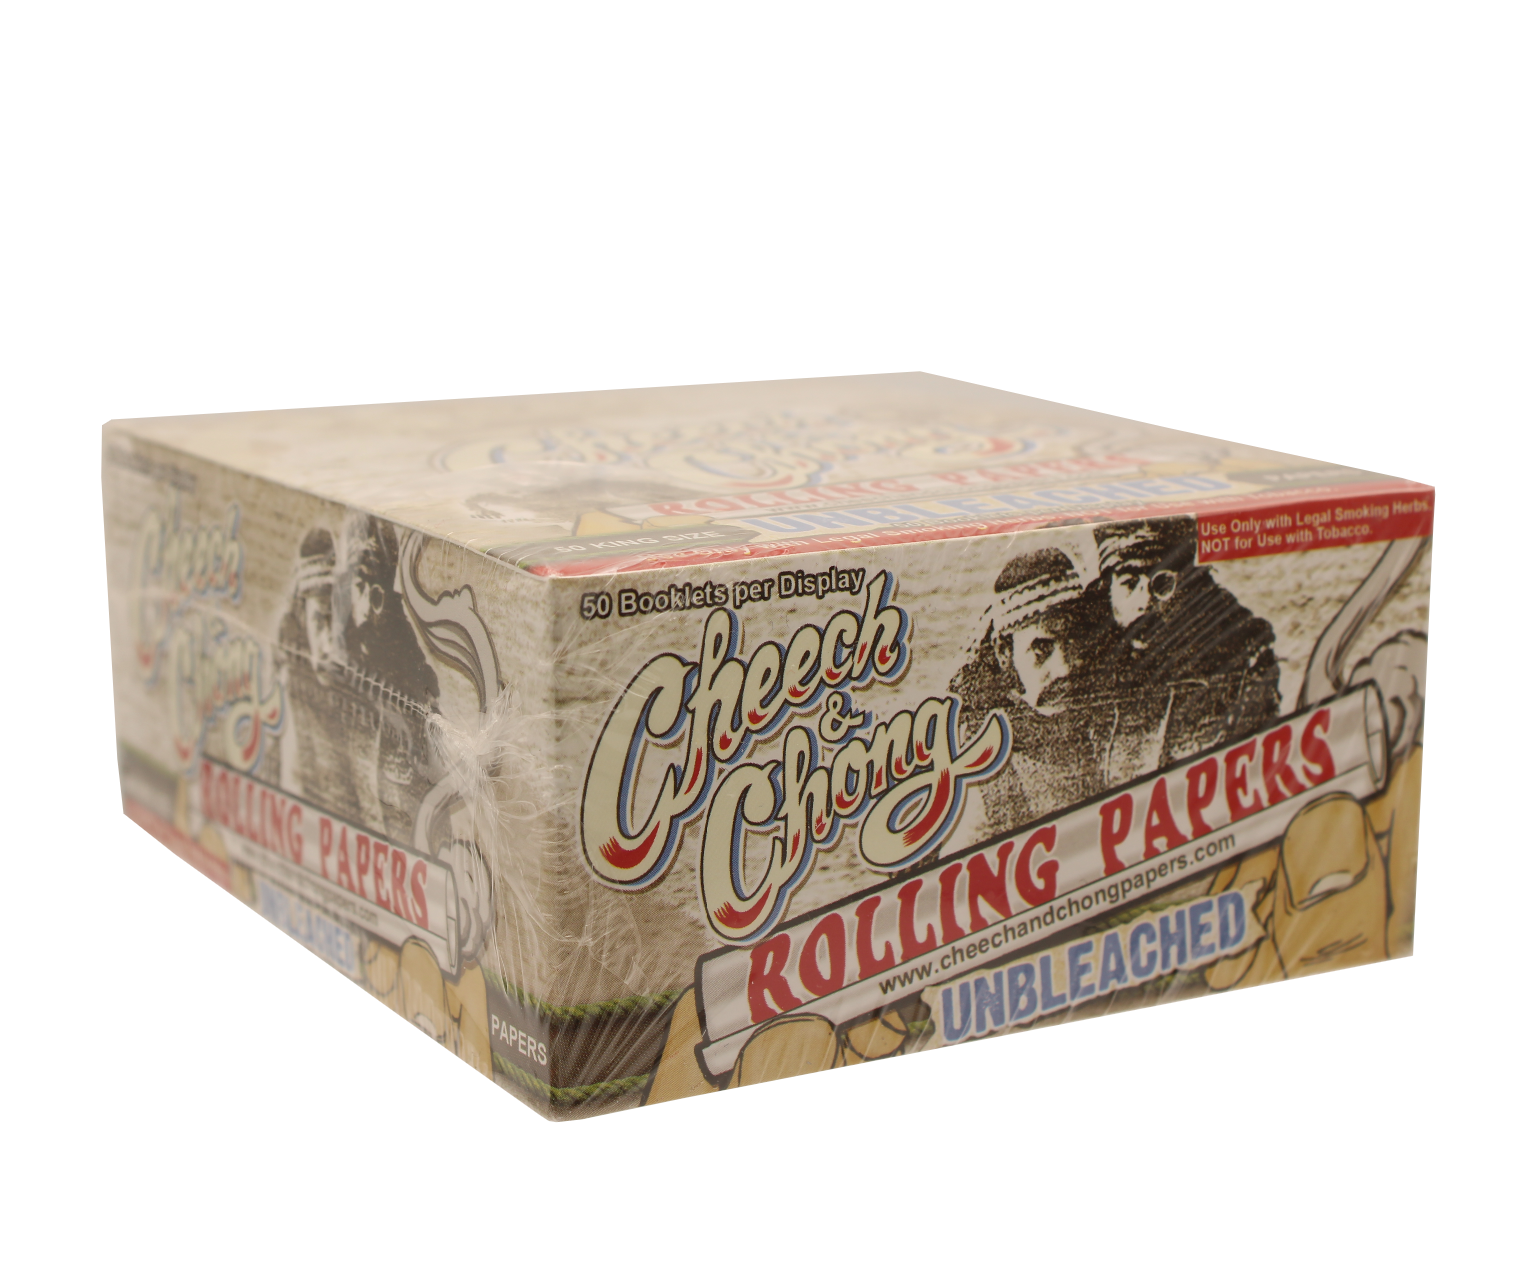 CHEECH & CHONG UNBLEACHED ROLLING PAPERS 50 CT - KING SIZE